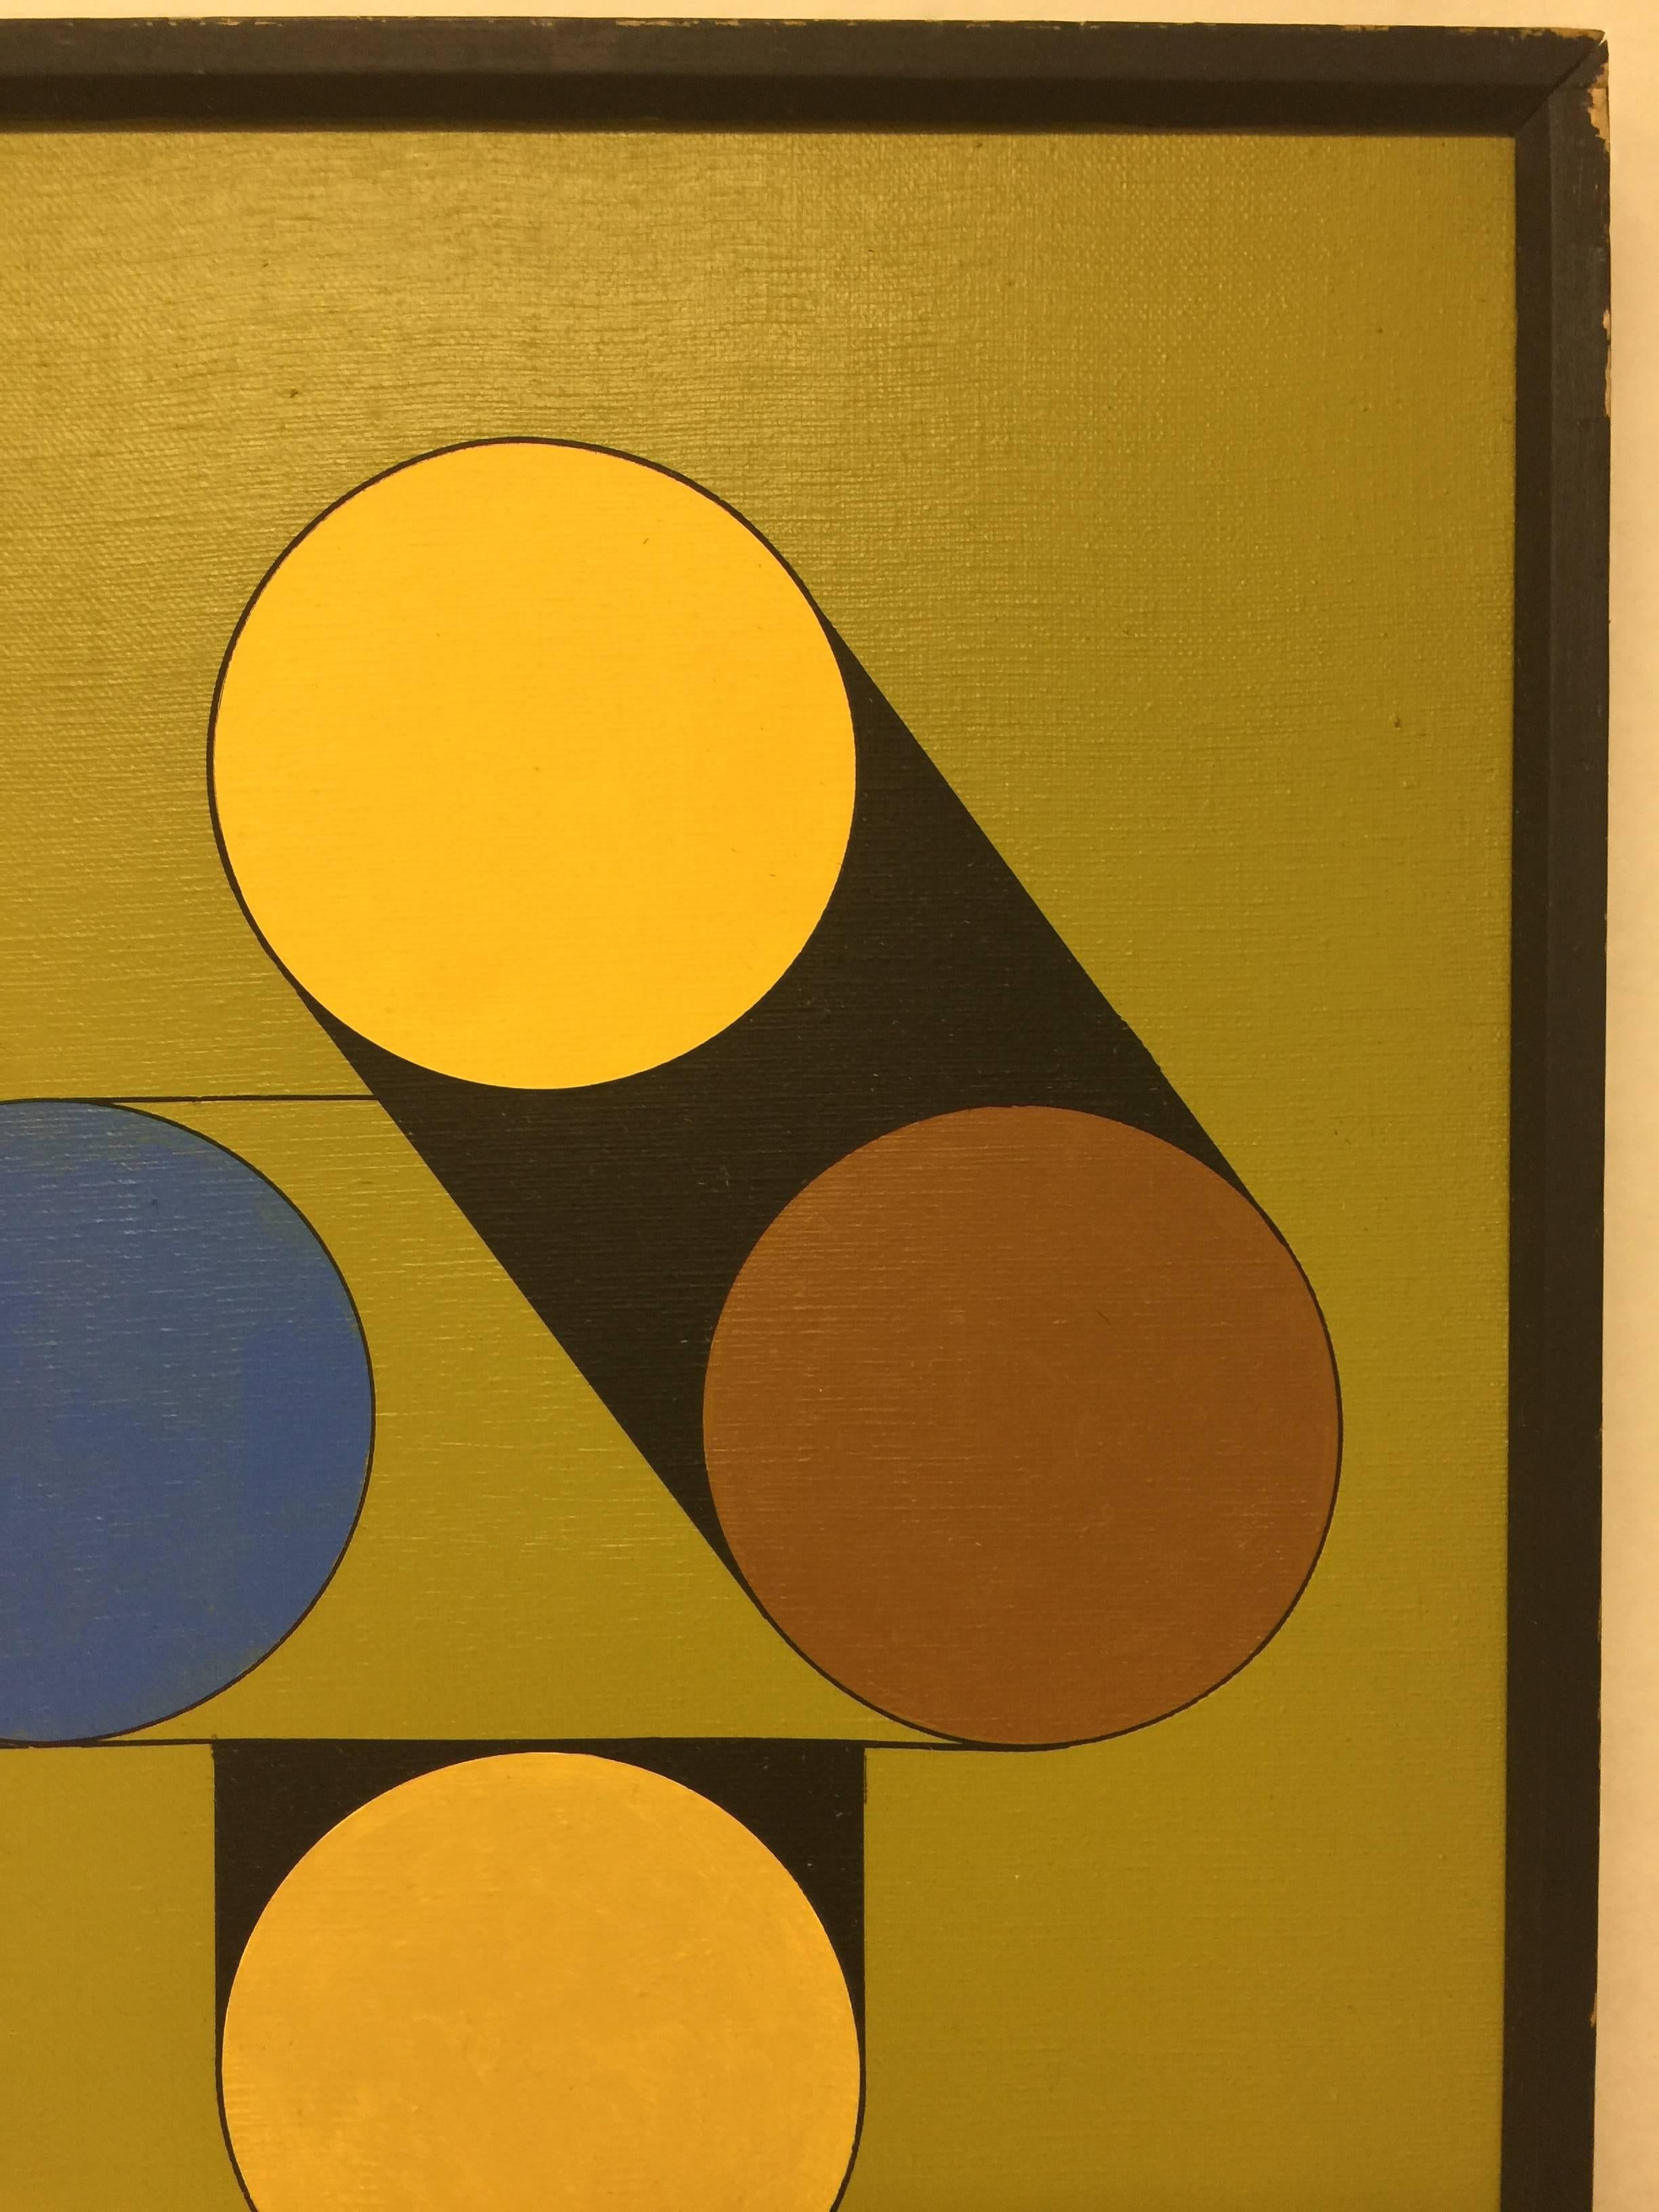 Painted Vintage circa 1980s Hard Edge Geometric Abstract Oil on Canvas Painting 1 of 5